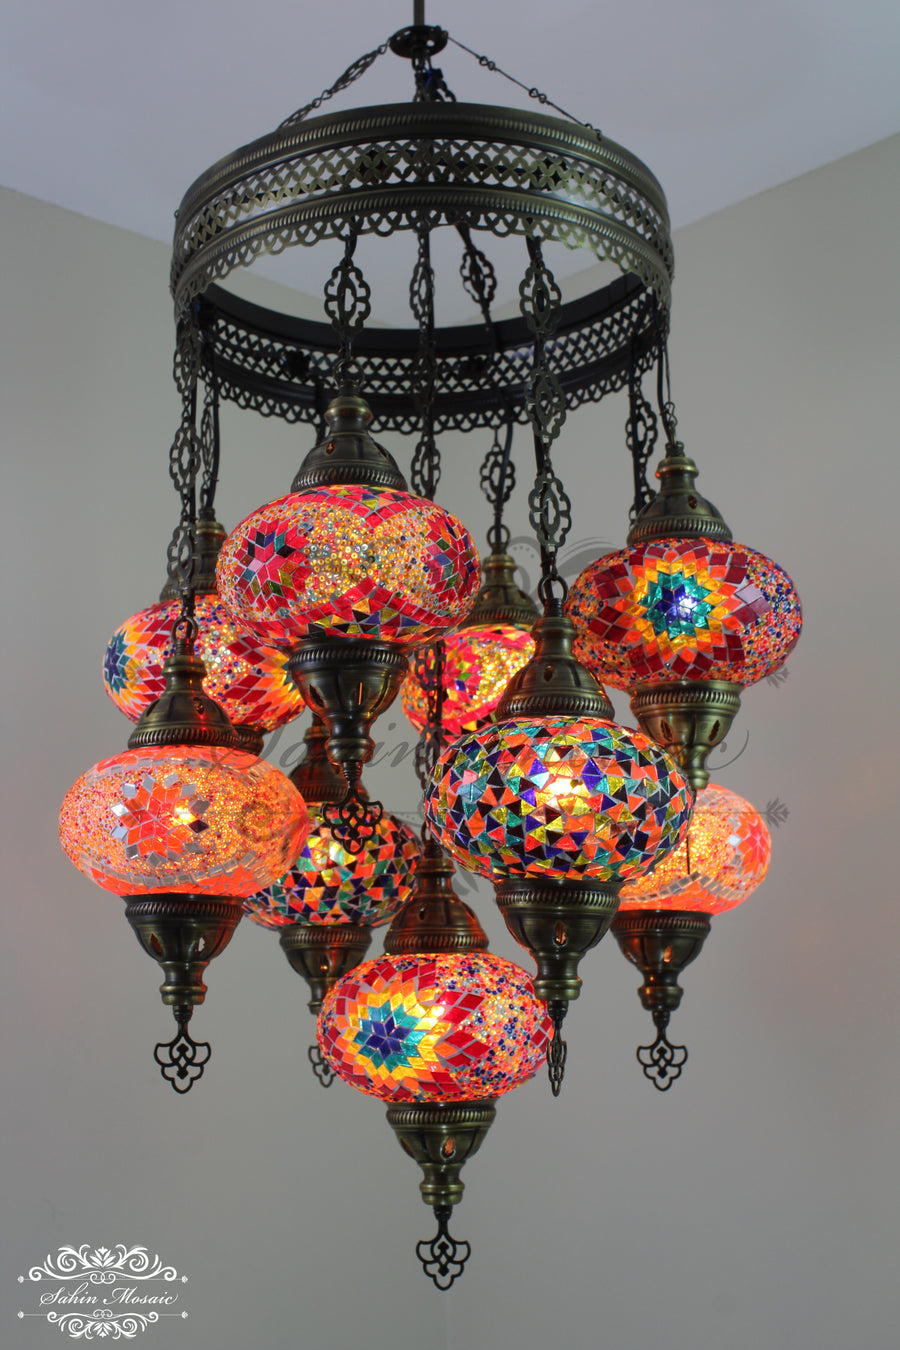 9-BALL TURKISH SULTAN MOSAIC CHANDELIER WITH NO3 (LARGE) GLOBES